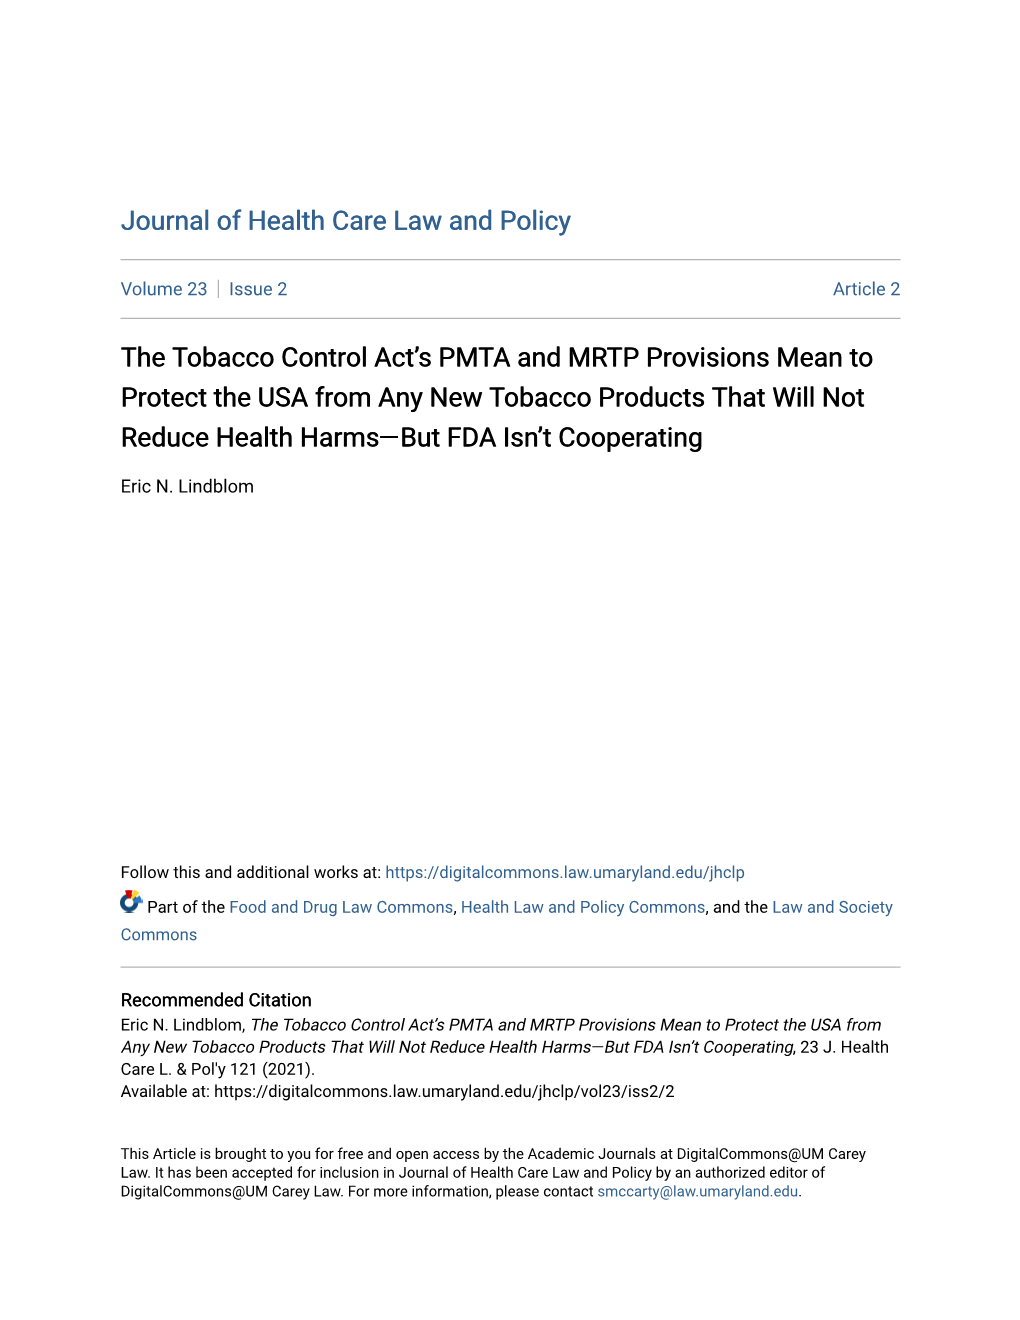 The Tobacco Control Act's PMTA and MRTP Provisions Mean to Protect